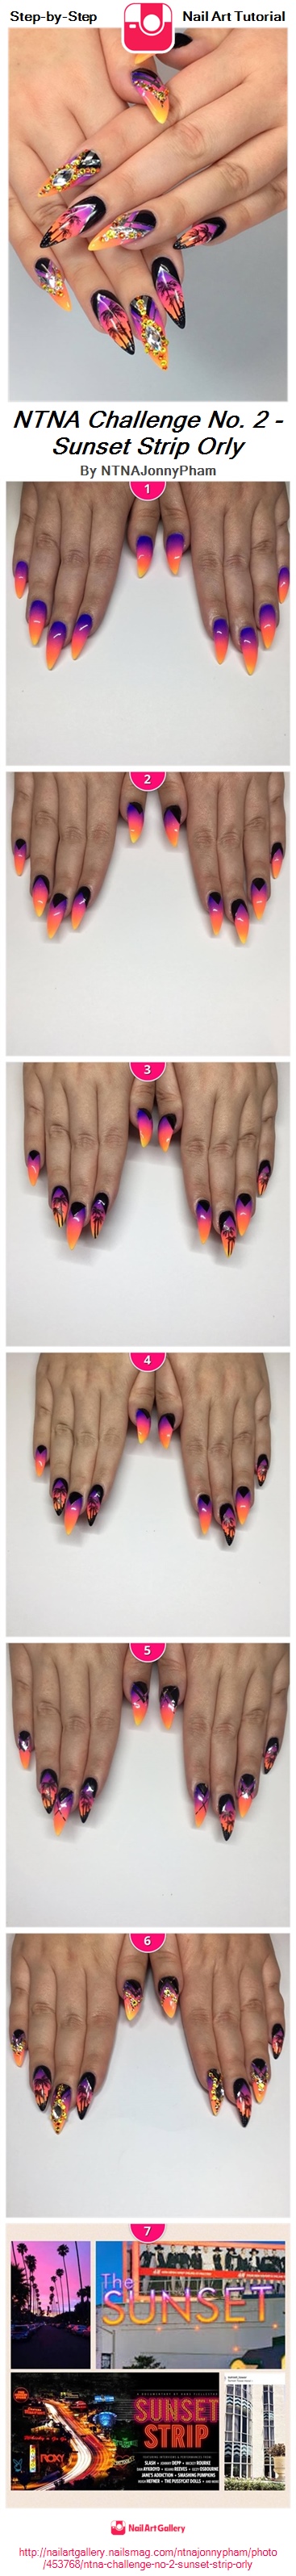 NTNA Challenge No. 2 - Sunset Strip Orly - Nail Art Gallery